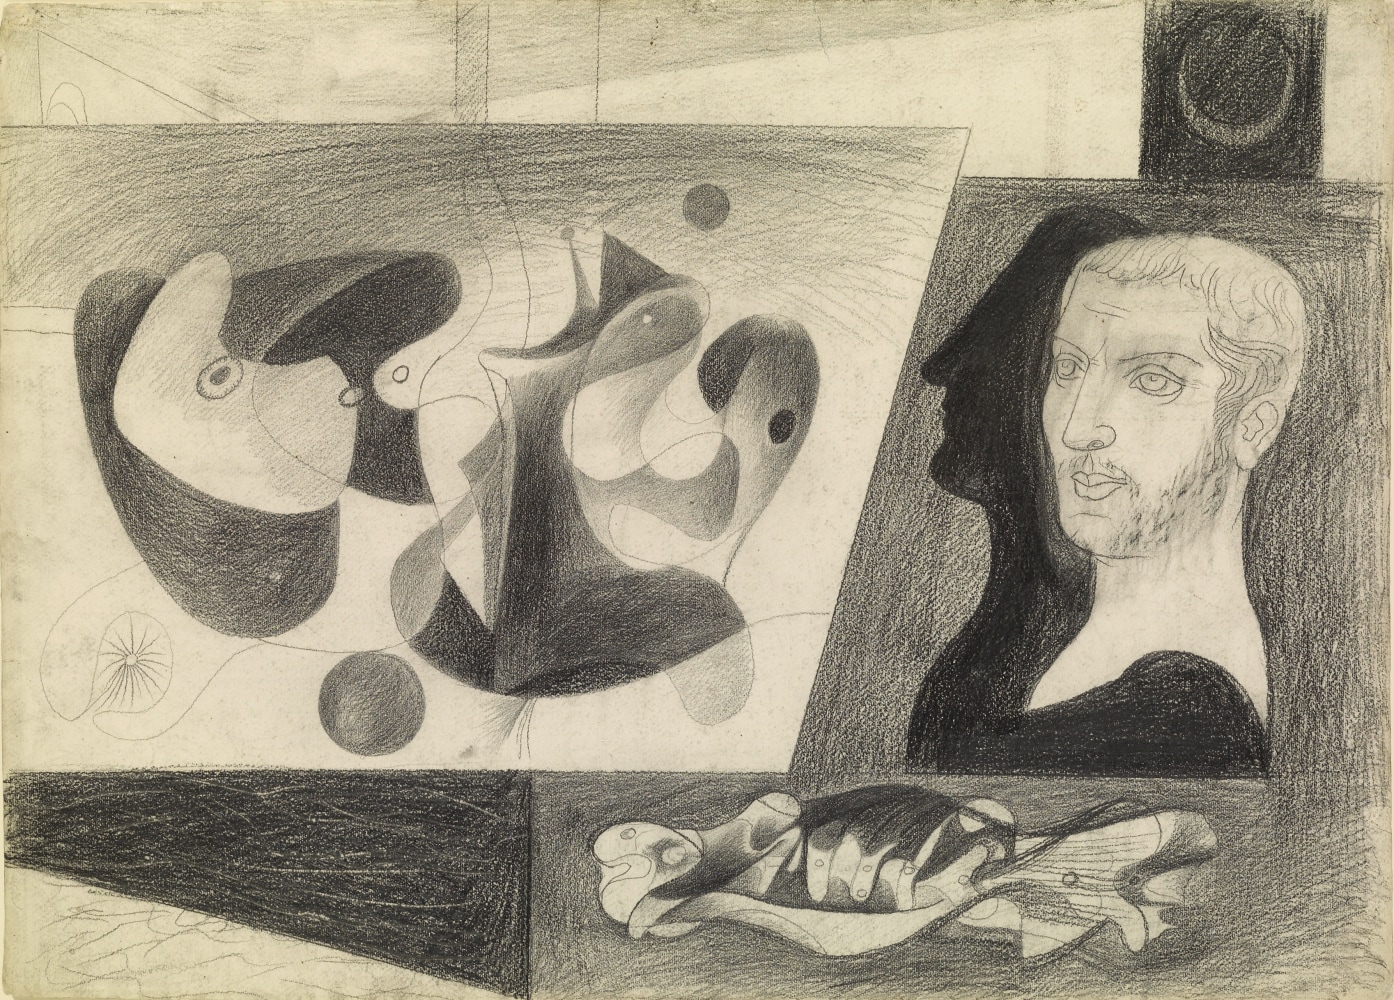 Abstract composition with arabesque shapes, a three-quarter view of a man with a shadow, and an écorché of a fish